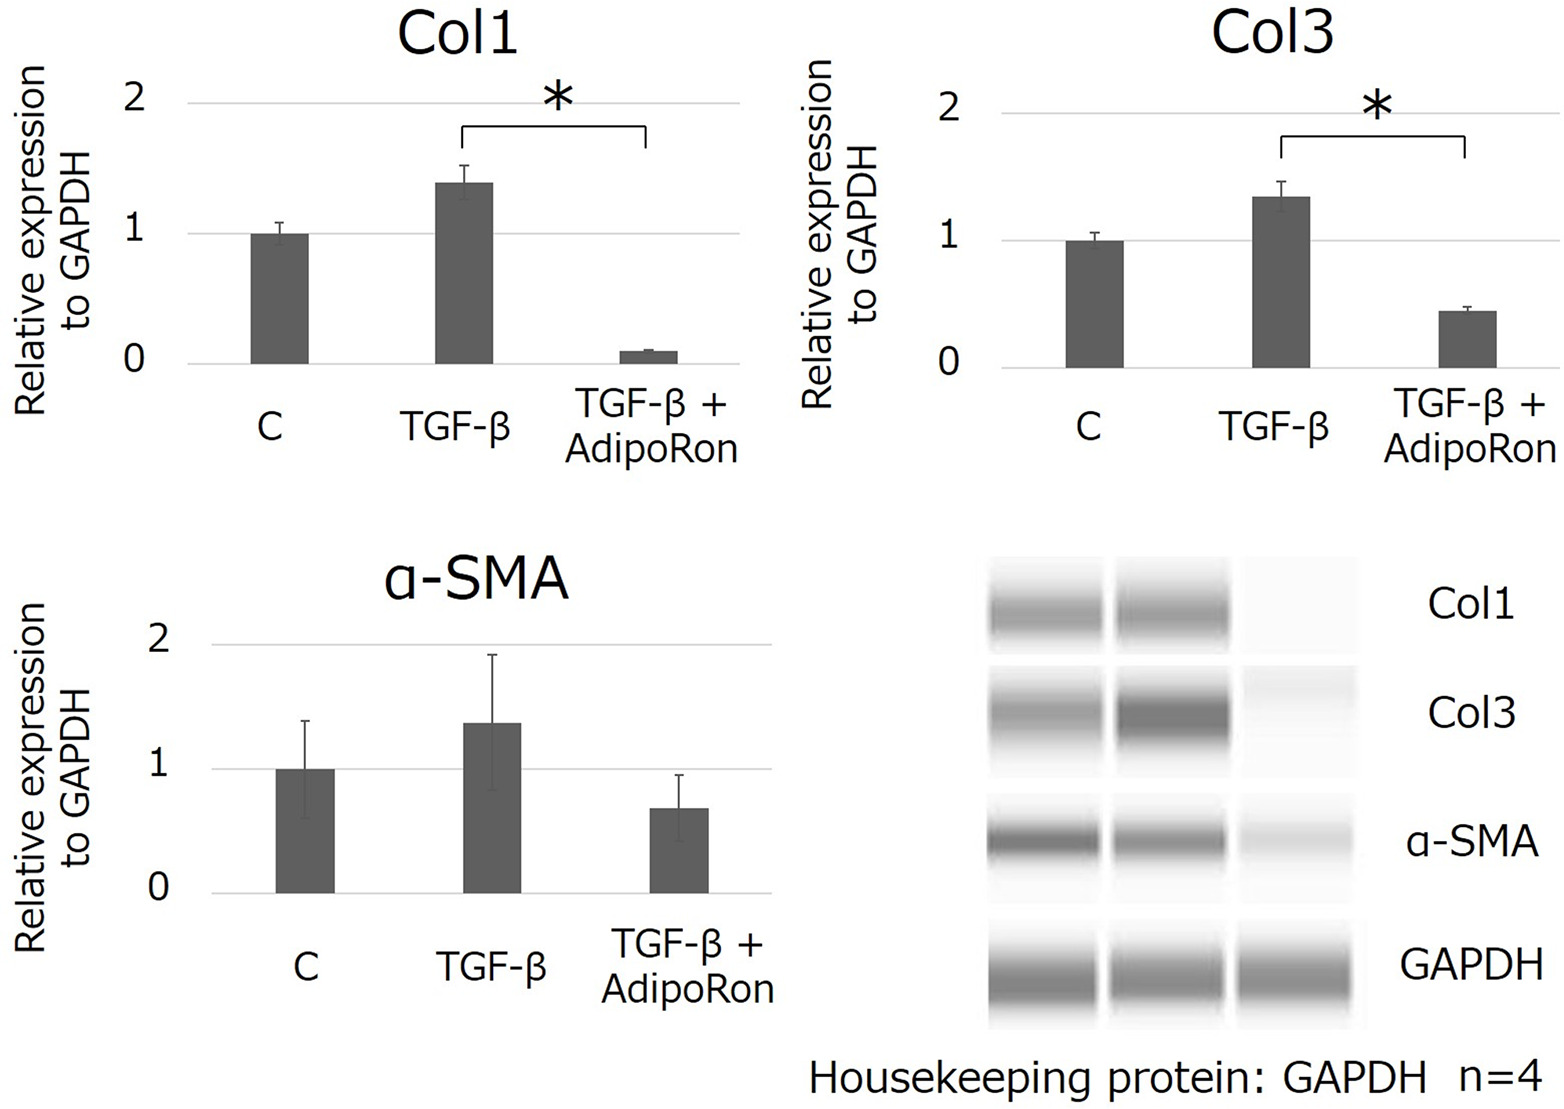 Fig. 6 
            Western blotting analysis of the fibrosis-related protein expression in the in vitro model of Dupuytren’s contracture. Fibroblasts derived from the palmar aponeurosis of patients with carpal tunnel syndrome (CTS) as control (C) were treated with transforming growth factor beta (TGF-β) with/without AdipoRon (100 μM) for 24 hours. Protein expression was normalized against the control. All results are expressed as means and standard error. * indicates p < 0.05. n = 4 for each group. αSMA, alpha-smooth muscle actin; Col1, collagen type I; Col3, collagen type III; CTGF, connective tissue growth factor; GAPDH, glyceraldehyde-3-phosphate dehydrogenase.
          